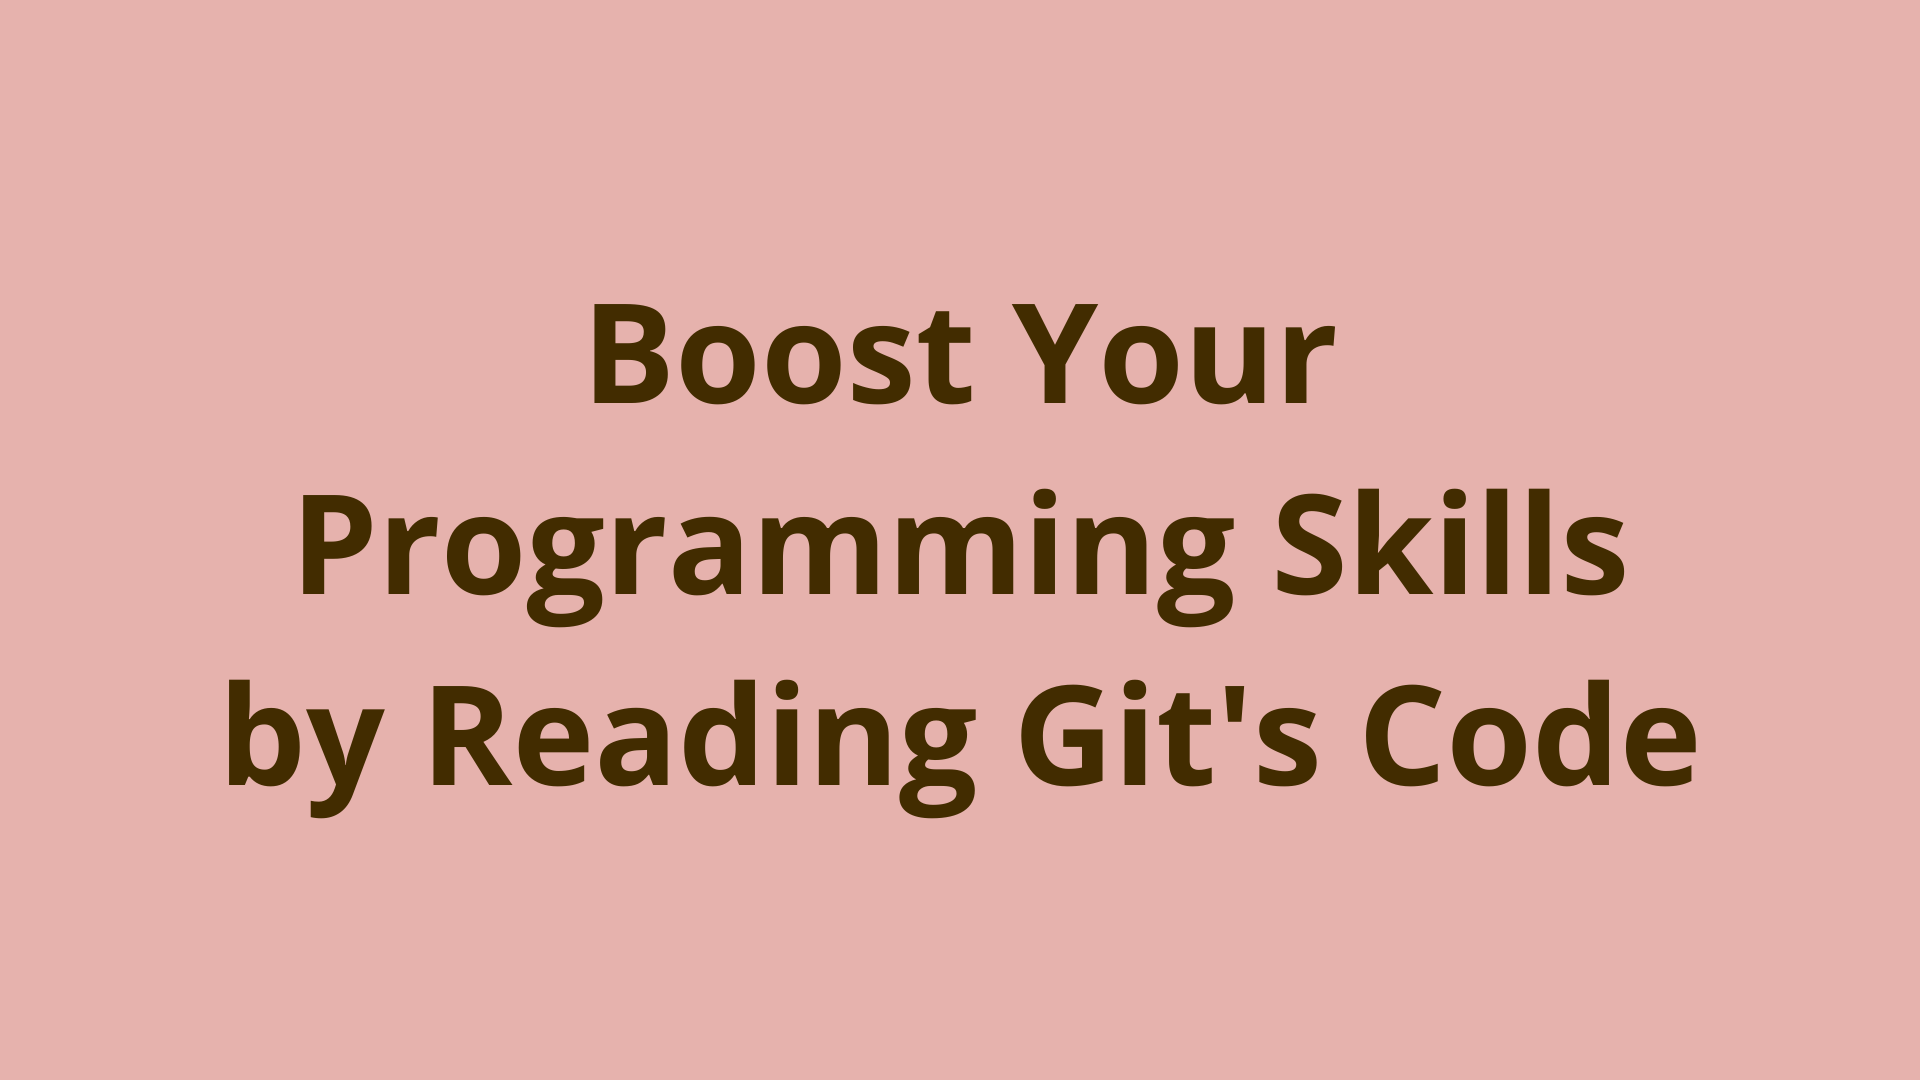 Boost Your Programming Skills by Reading Git's Code